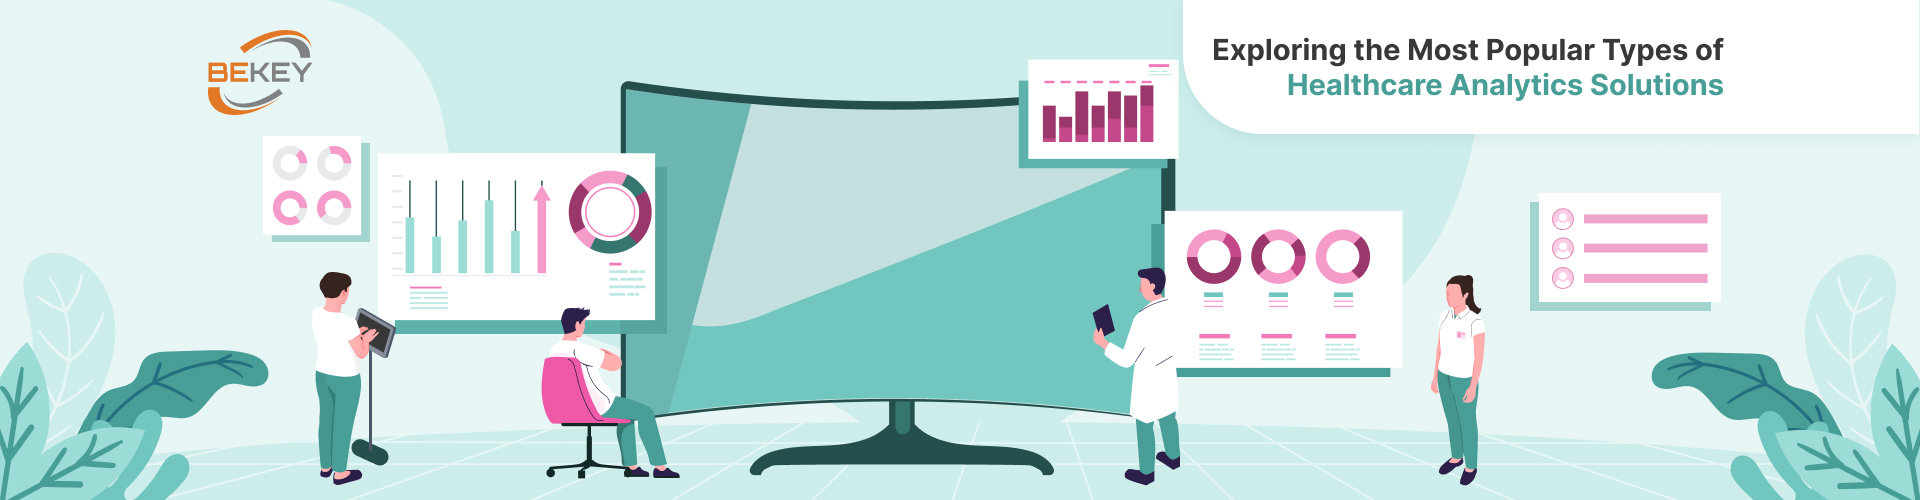 Exploring the Most Popular Types of Healthcare Analytics Solutions - image